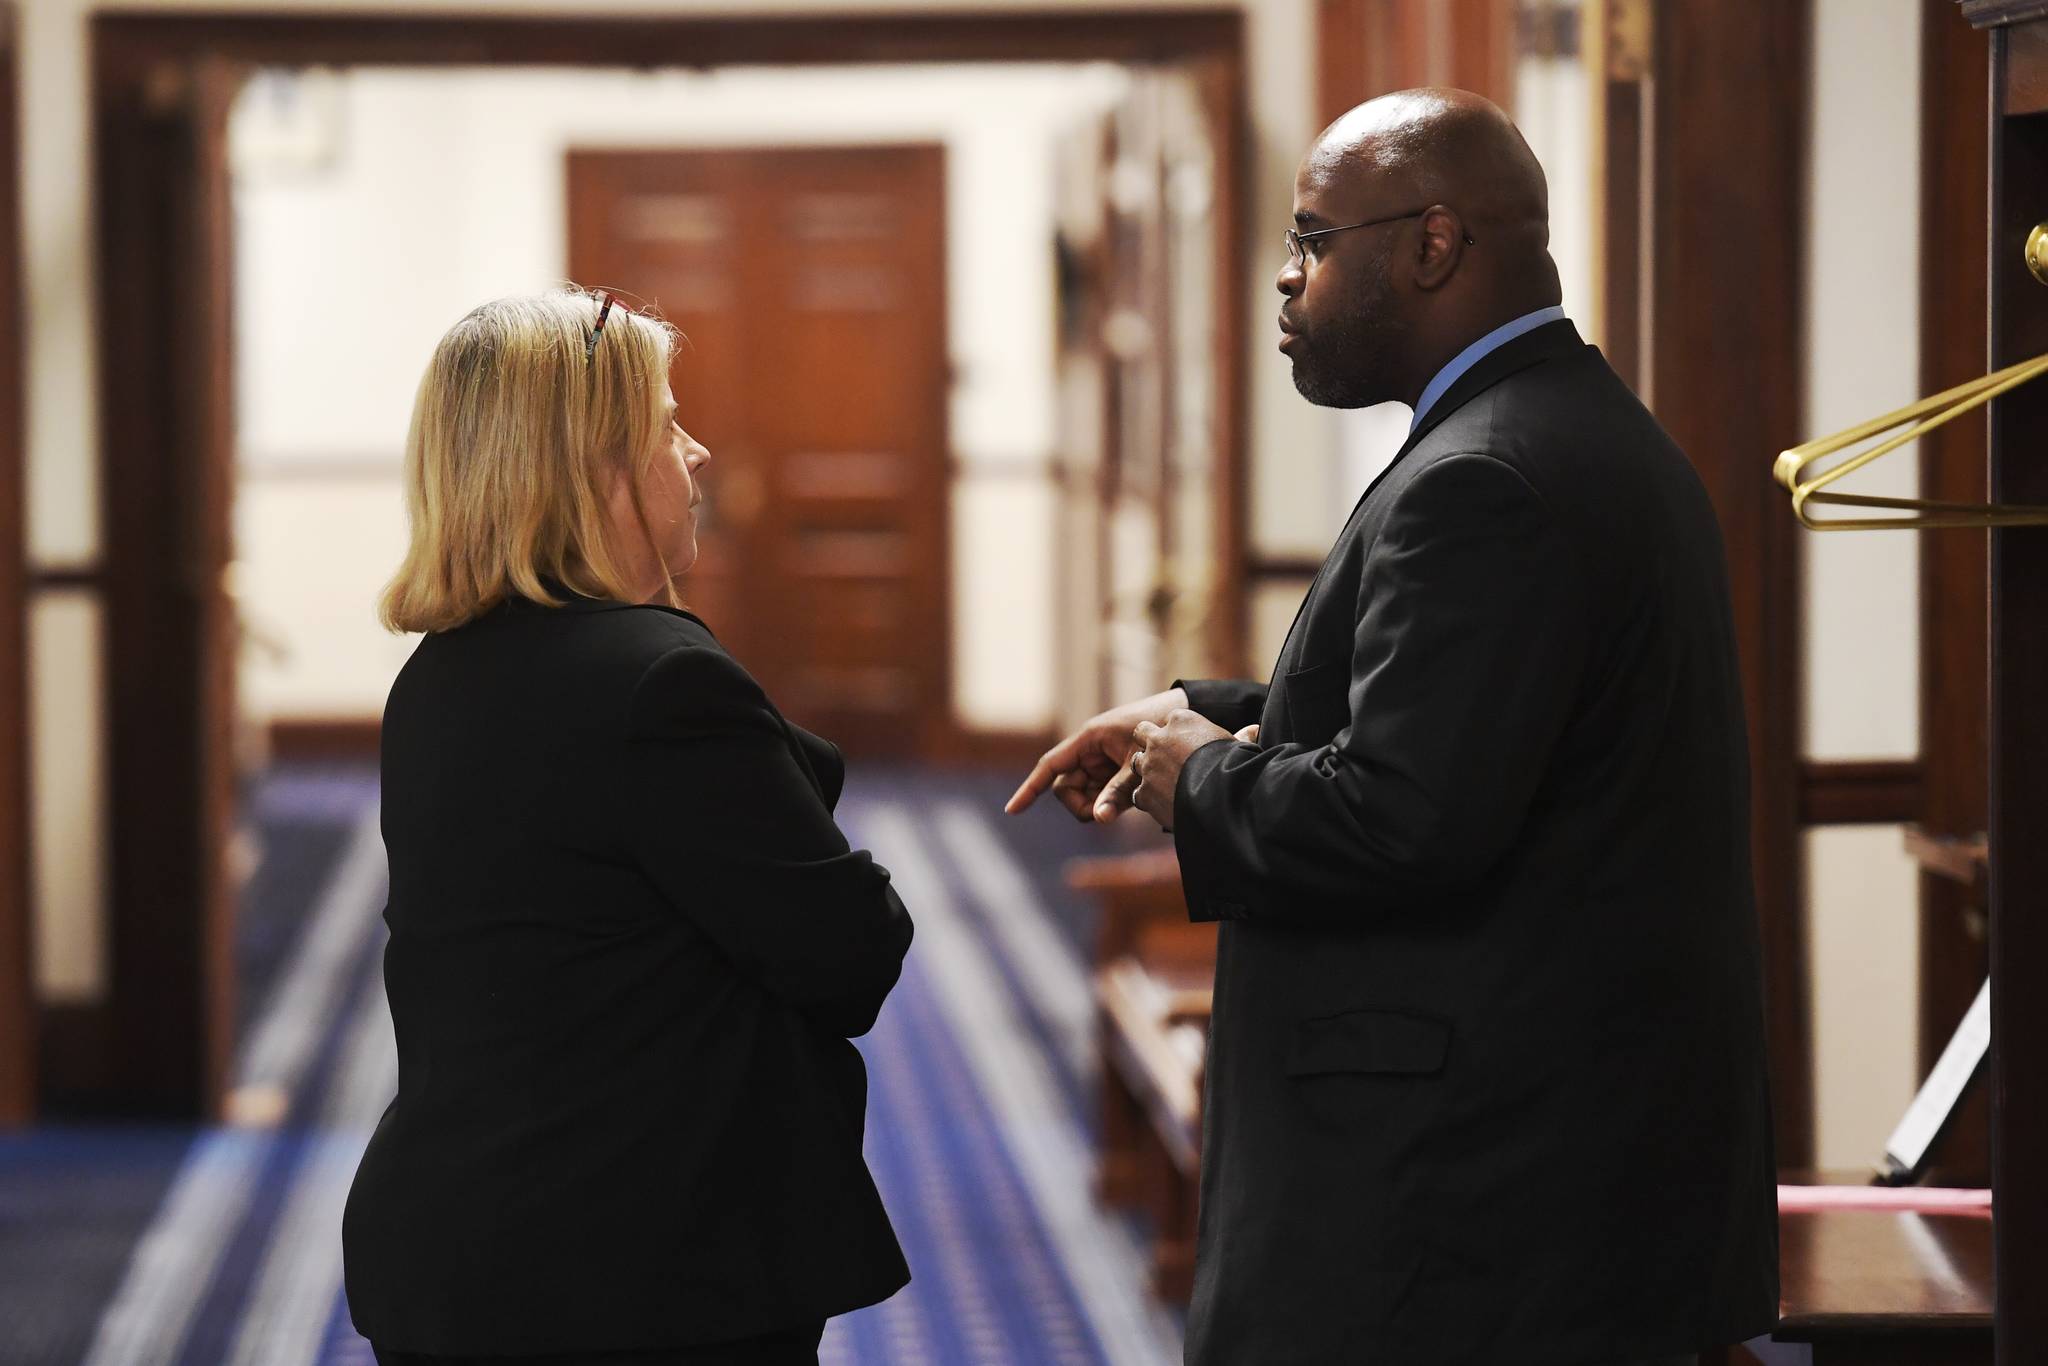 Sen. Tammie Wilson, R-North Pole, left, talks with Sen. David Wilson, R-Wasilla, before a continued Joint Session of the Alaska Legislature at the Capitol on Thursday, July 11, 2019. (Michael Penn | Juneau Empire)